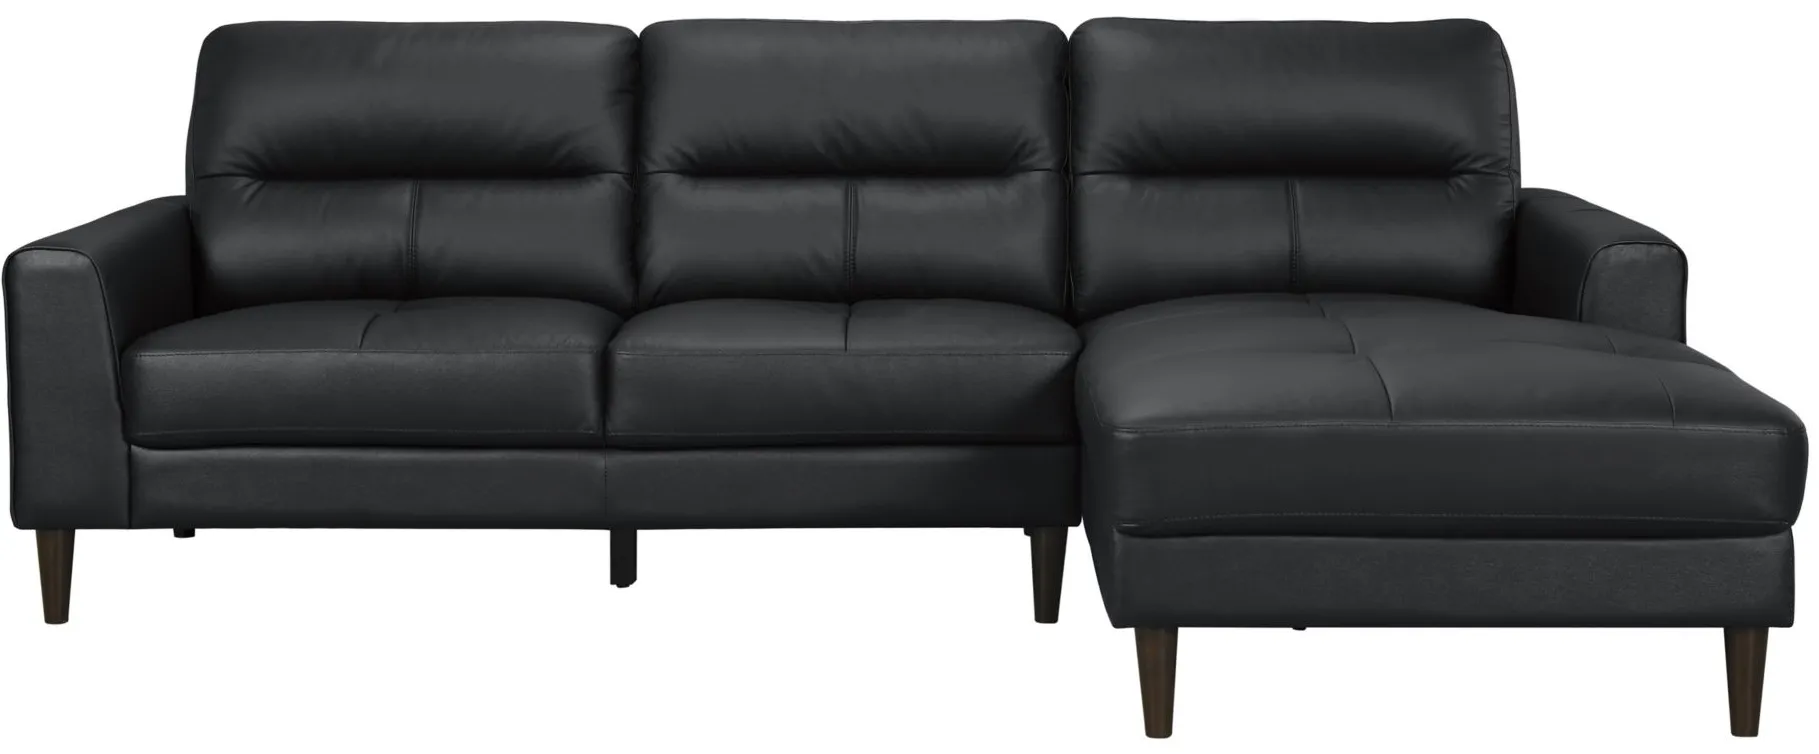 Landrum Sectional -2-pc.. in Black by Homelegance